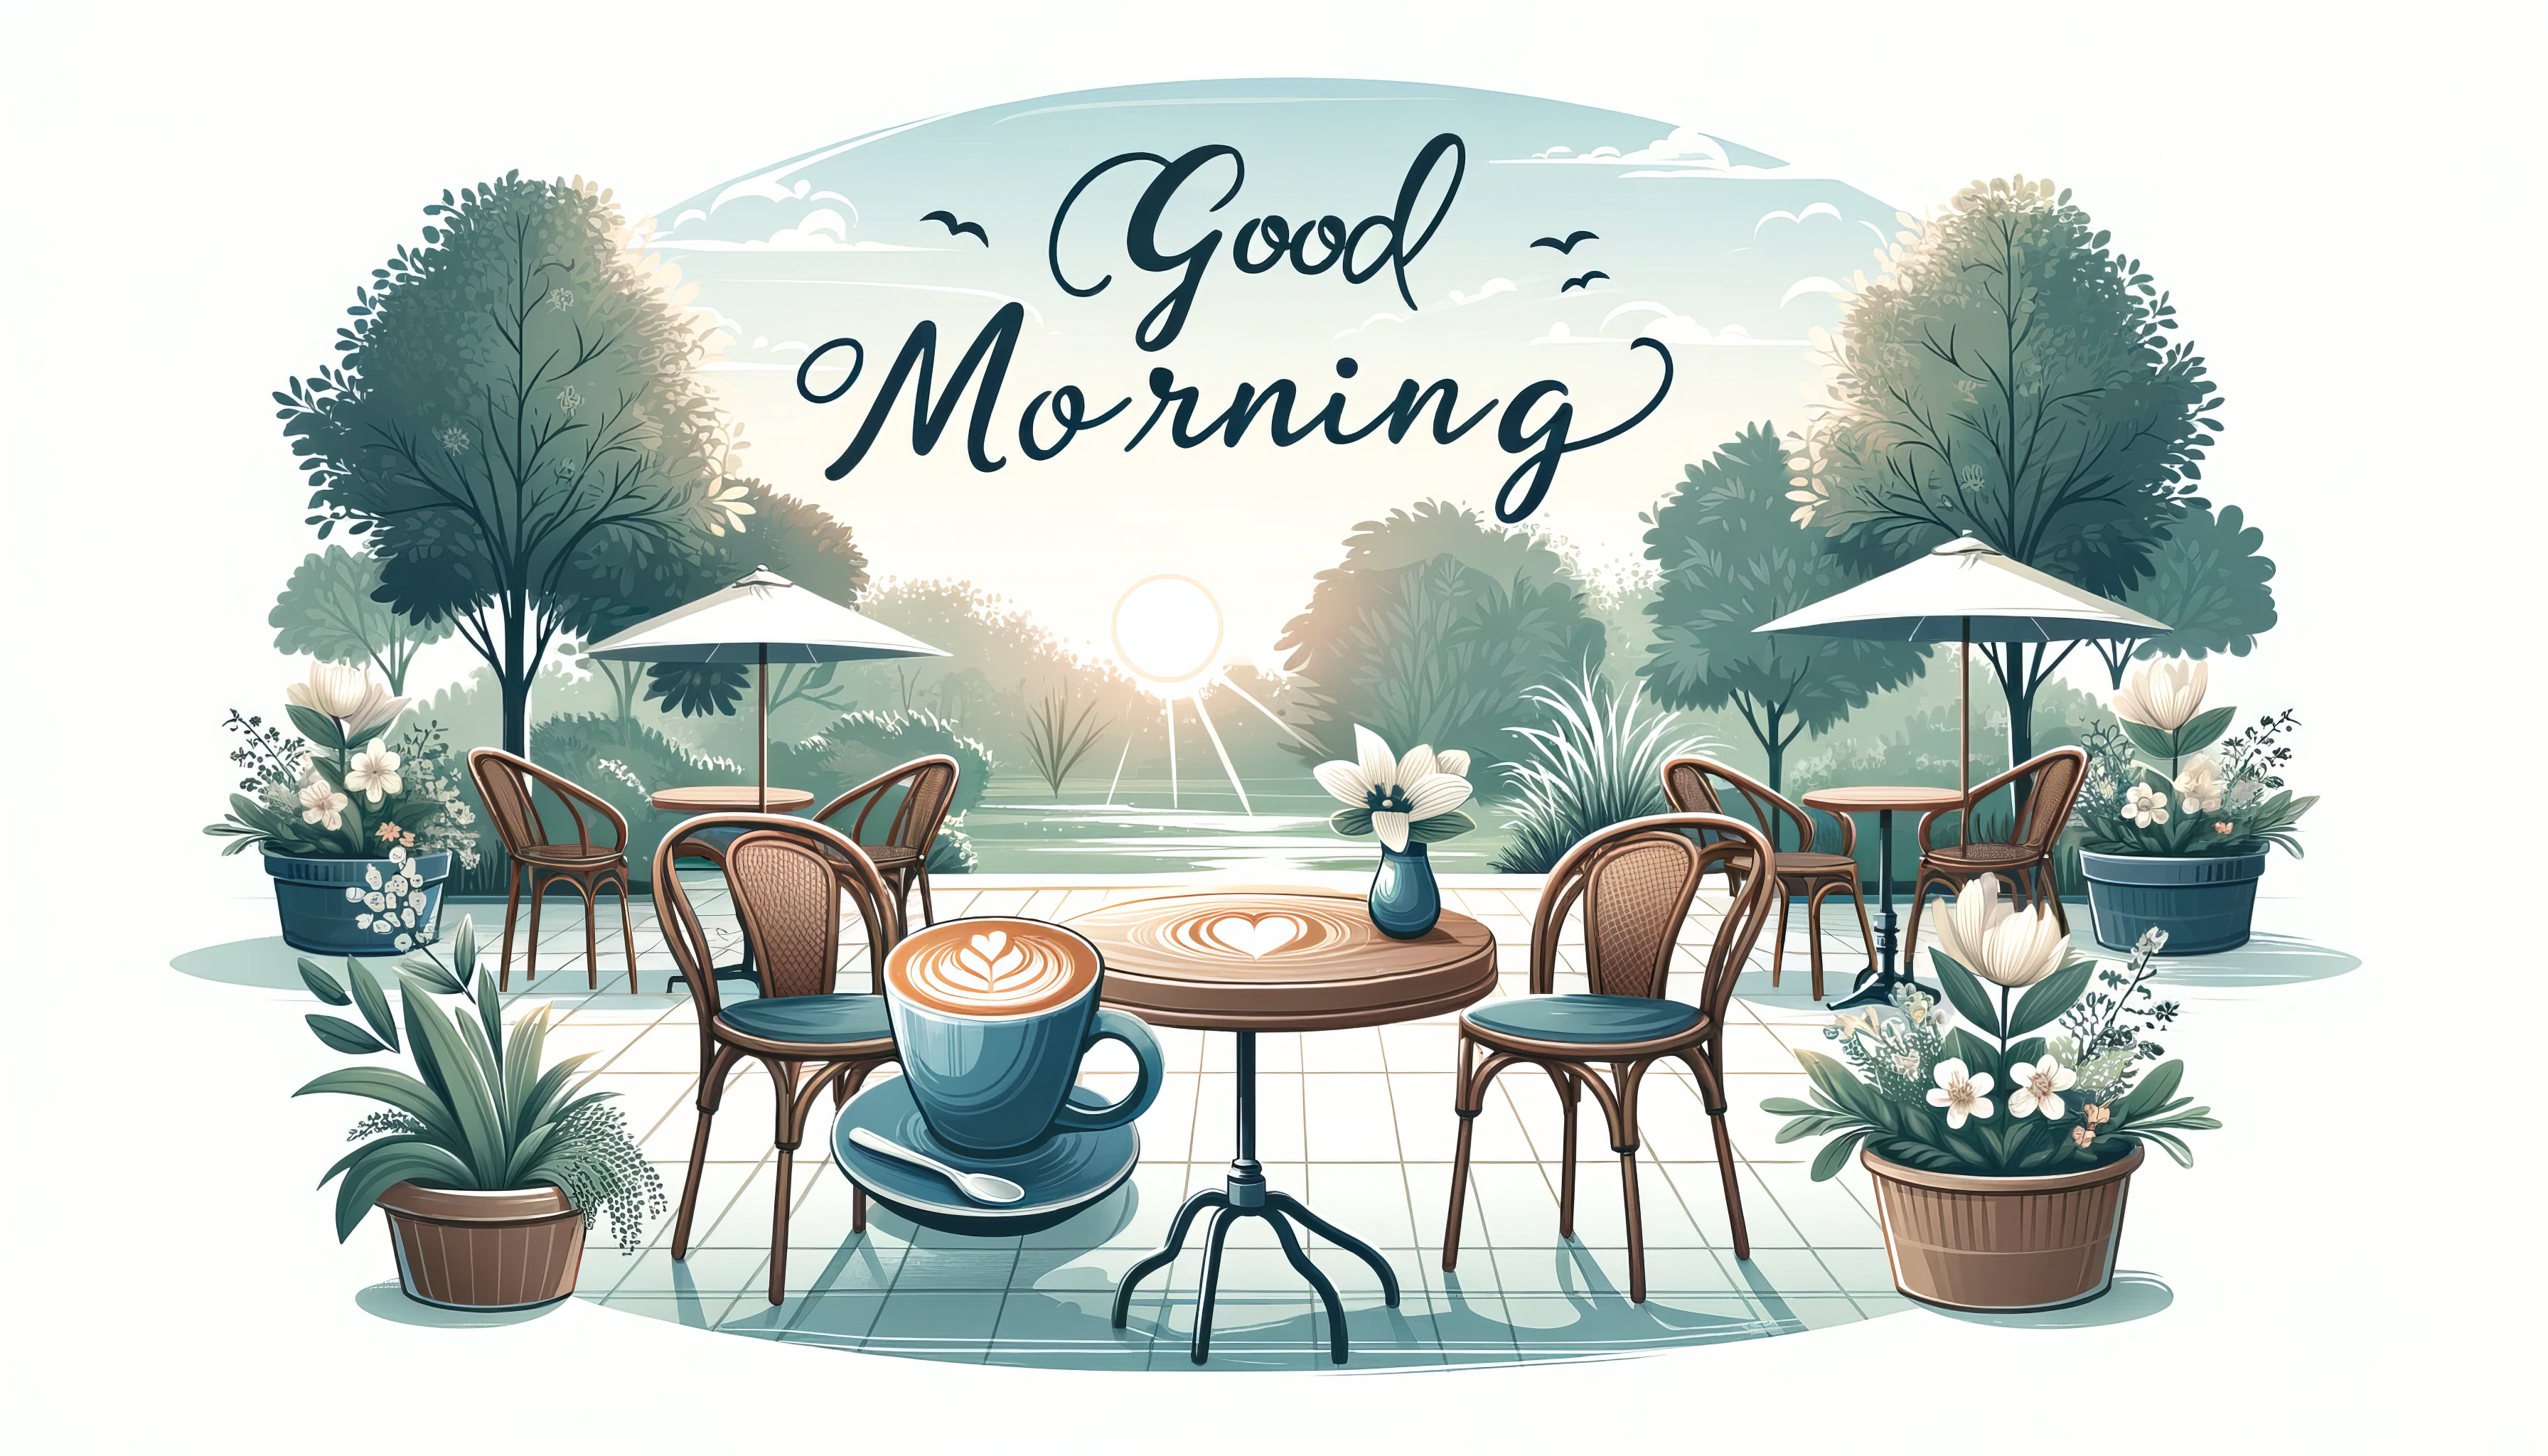 Illustration of a serene morning coffee setup with chairs and table surrounded by plants and a 'Good Morning' message for HD desktop wallpaper.